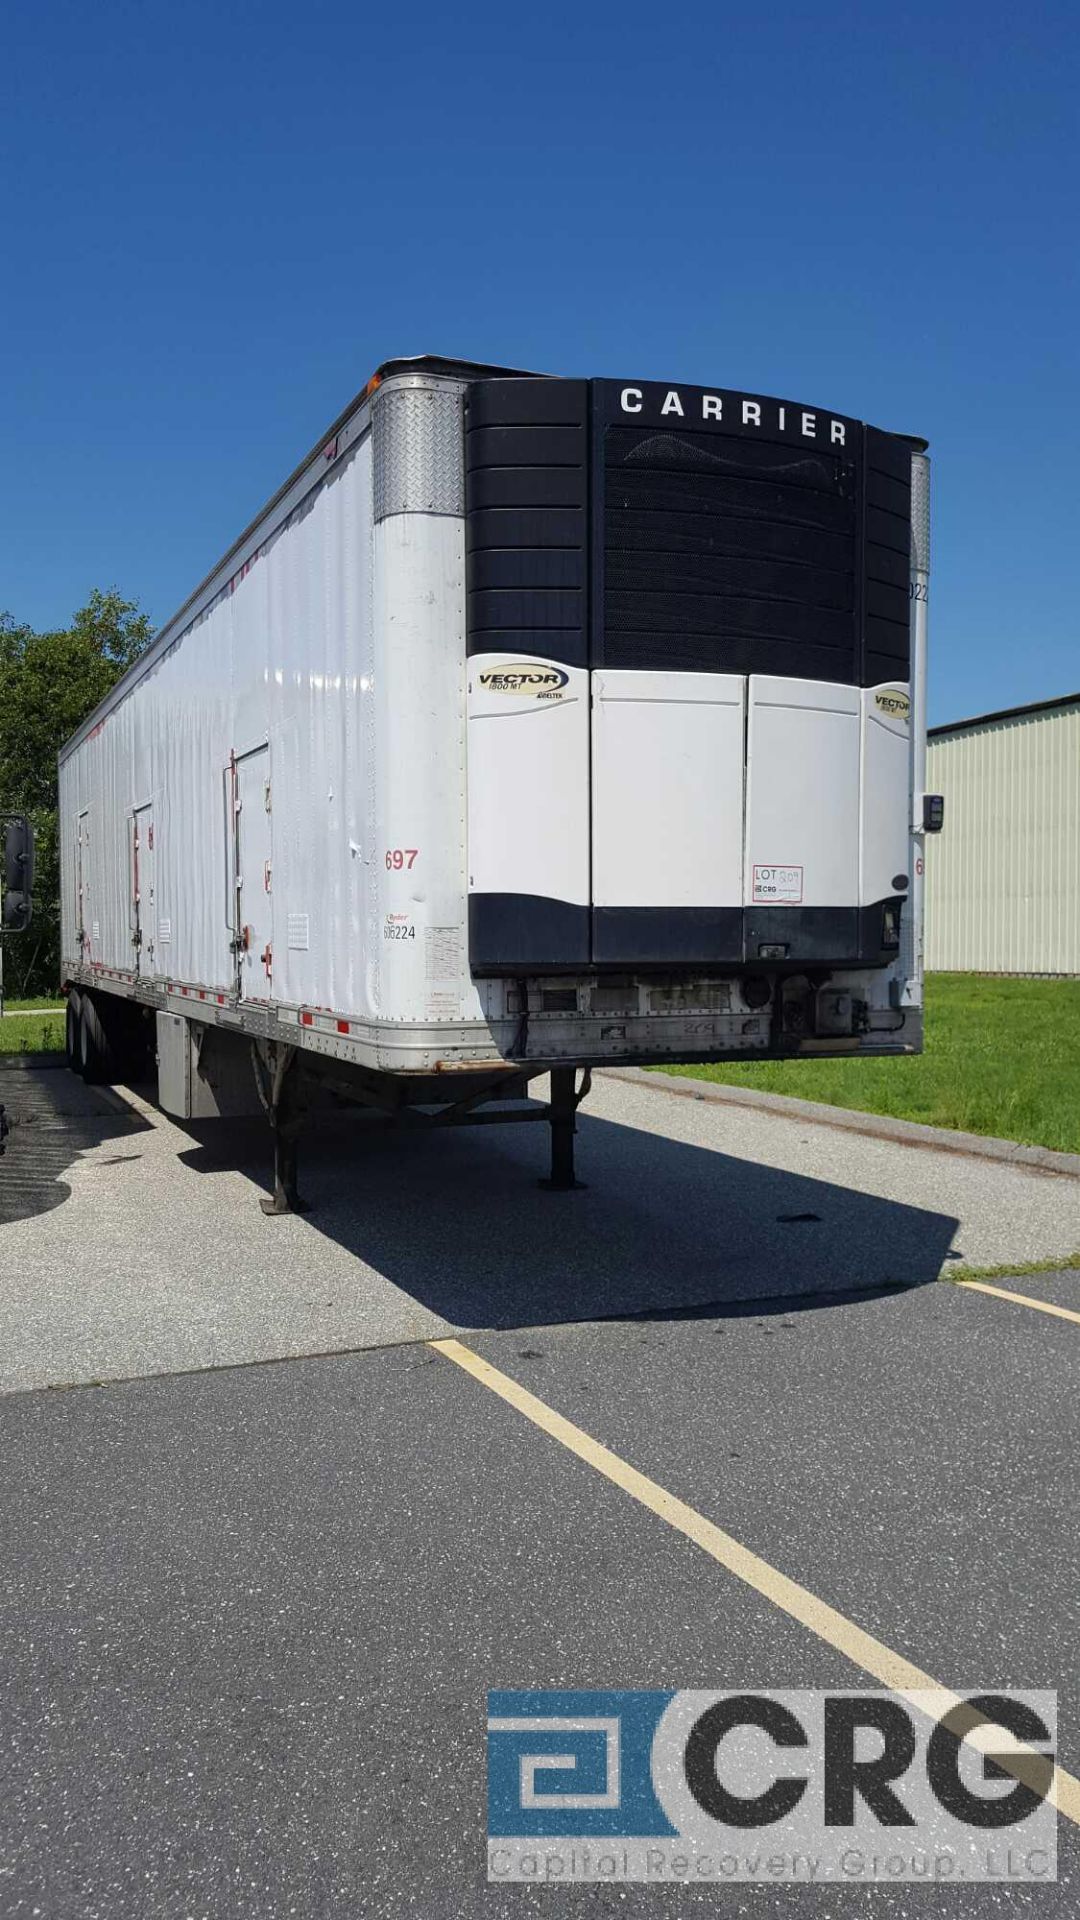 2009 Great Dane Multi Temp Refrigerated Semi Trailer - 45 Long, 102" wide, Carrier Vector 1800MT - Image 2 of 5